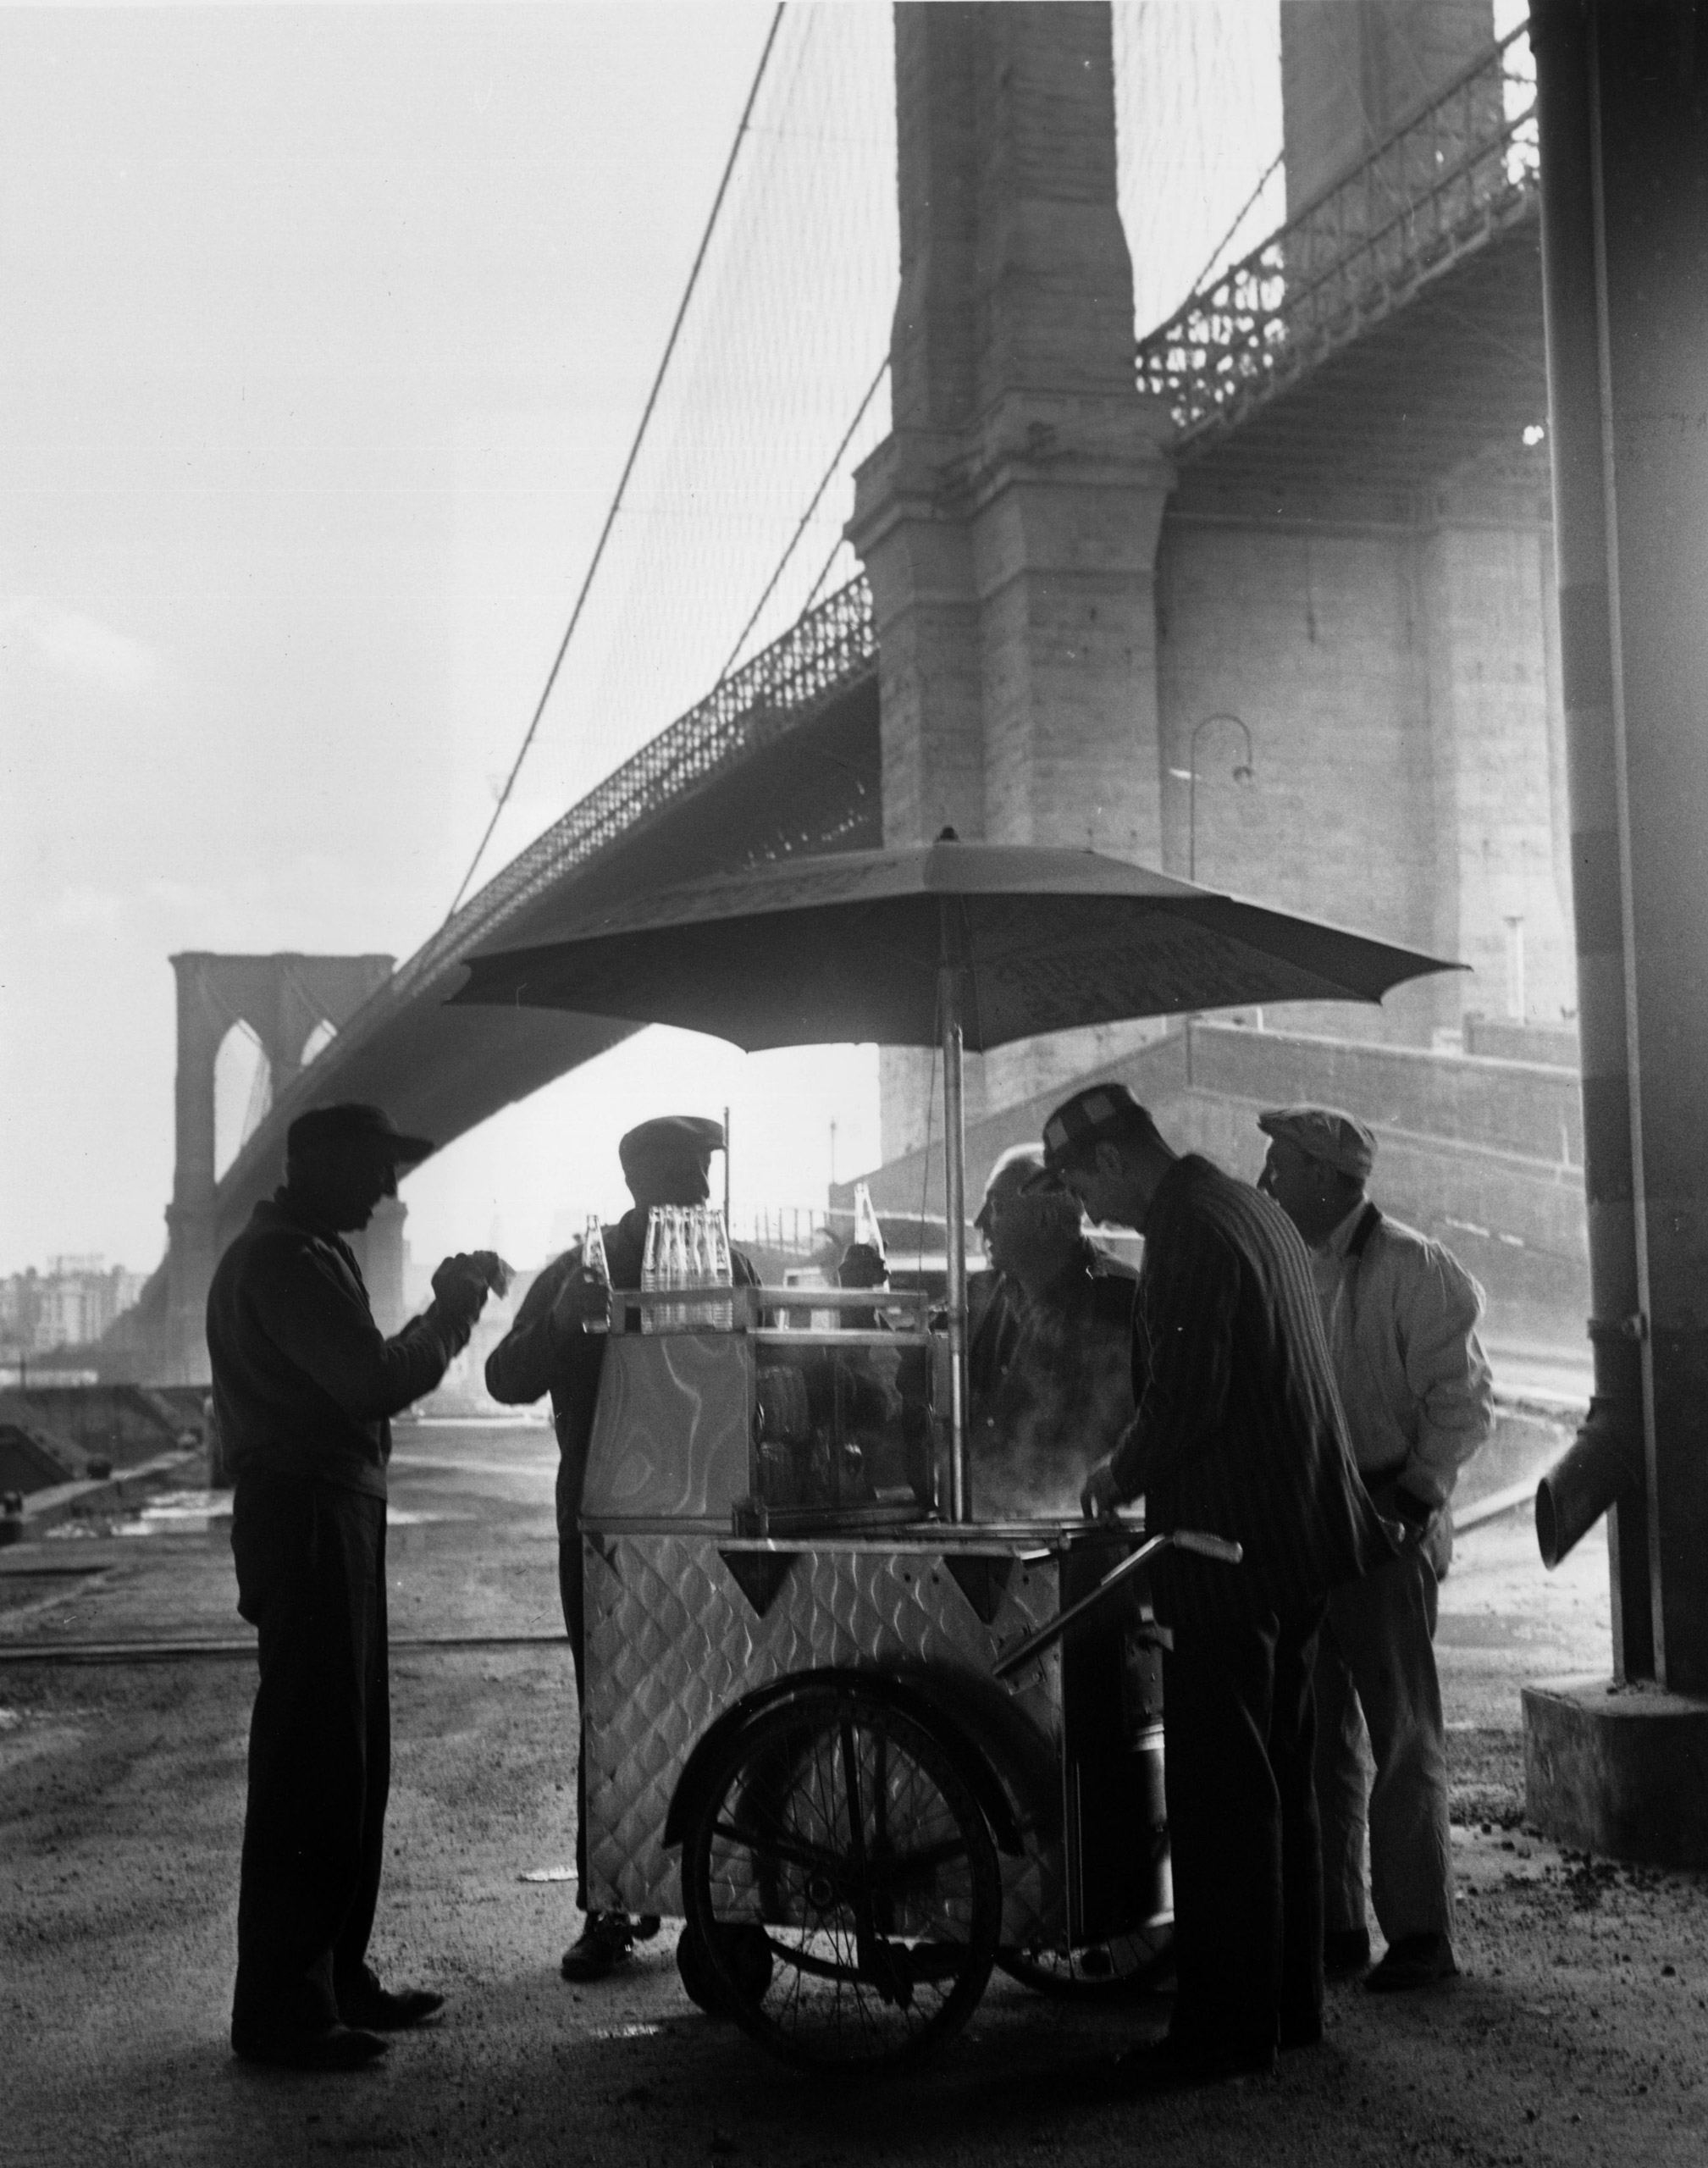 A group of workers getting refreshments from a portable snack stand underneath Brooklyn Bridge.